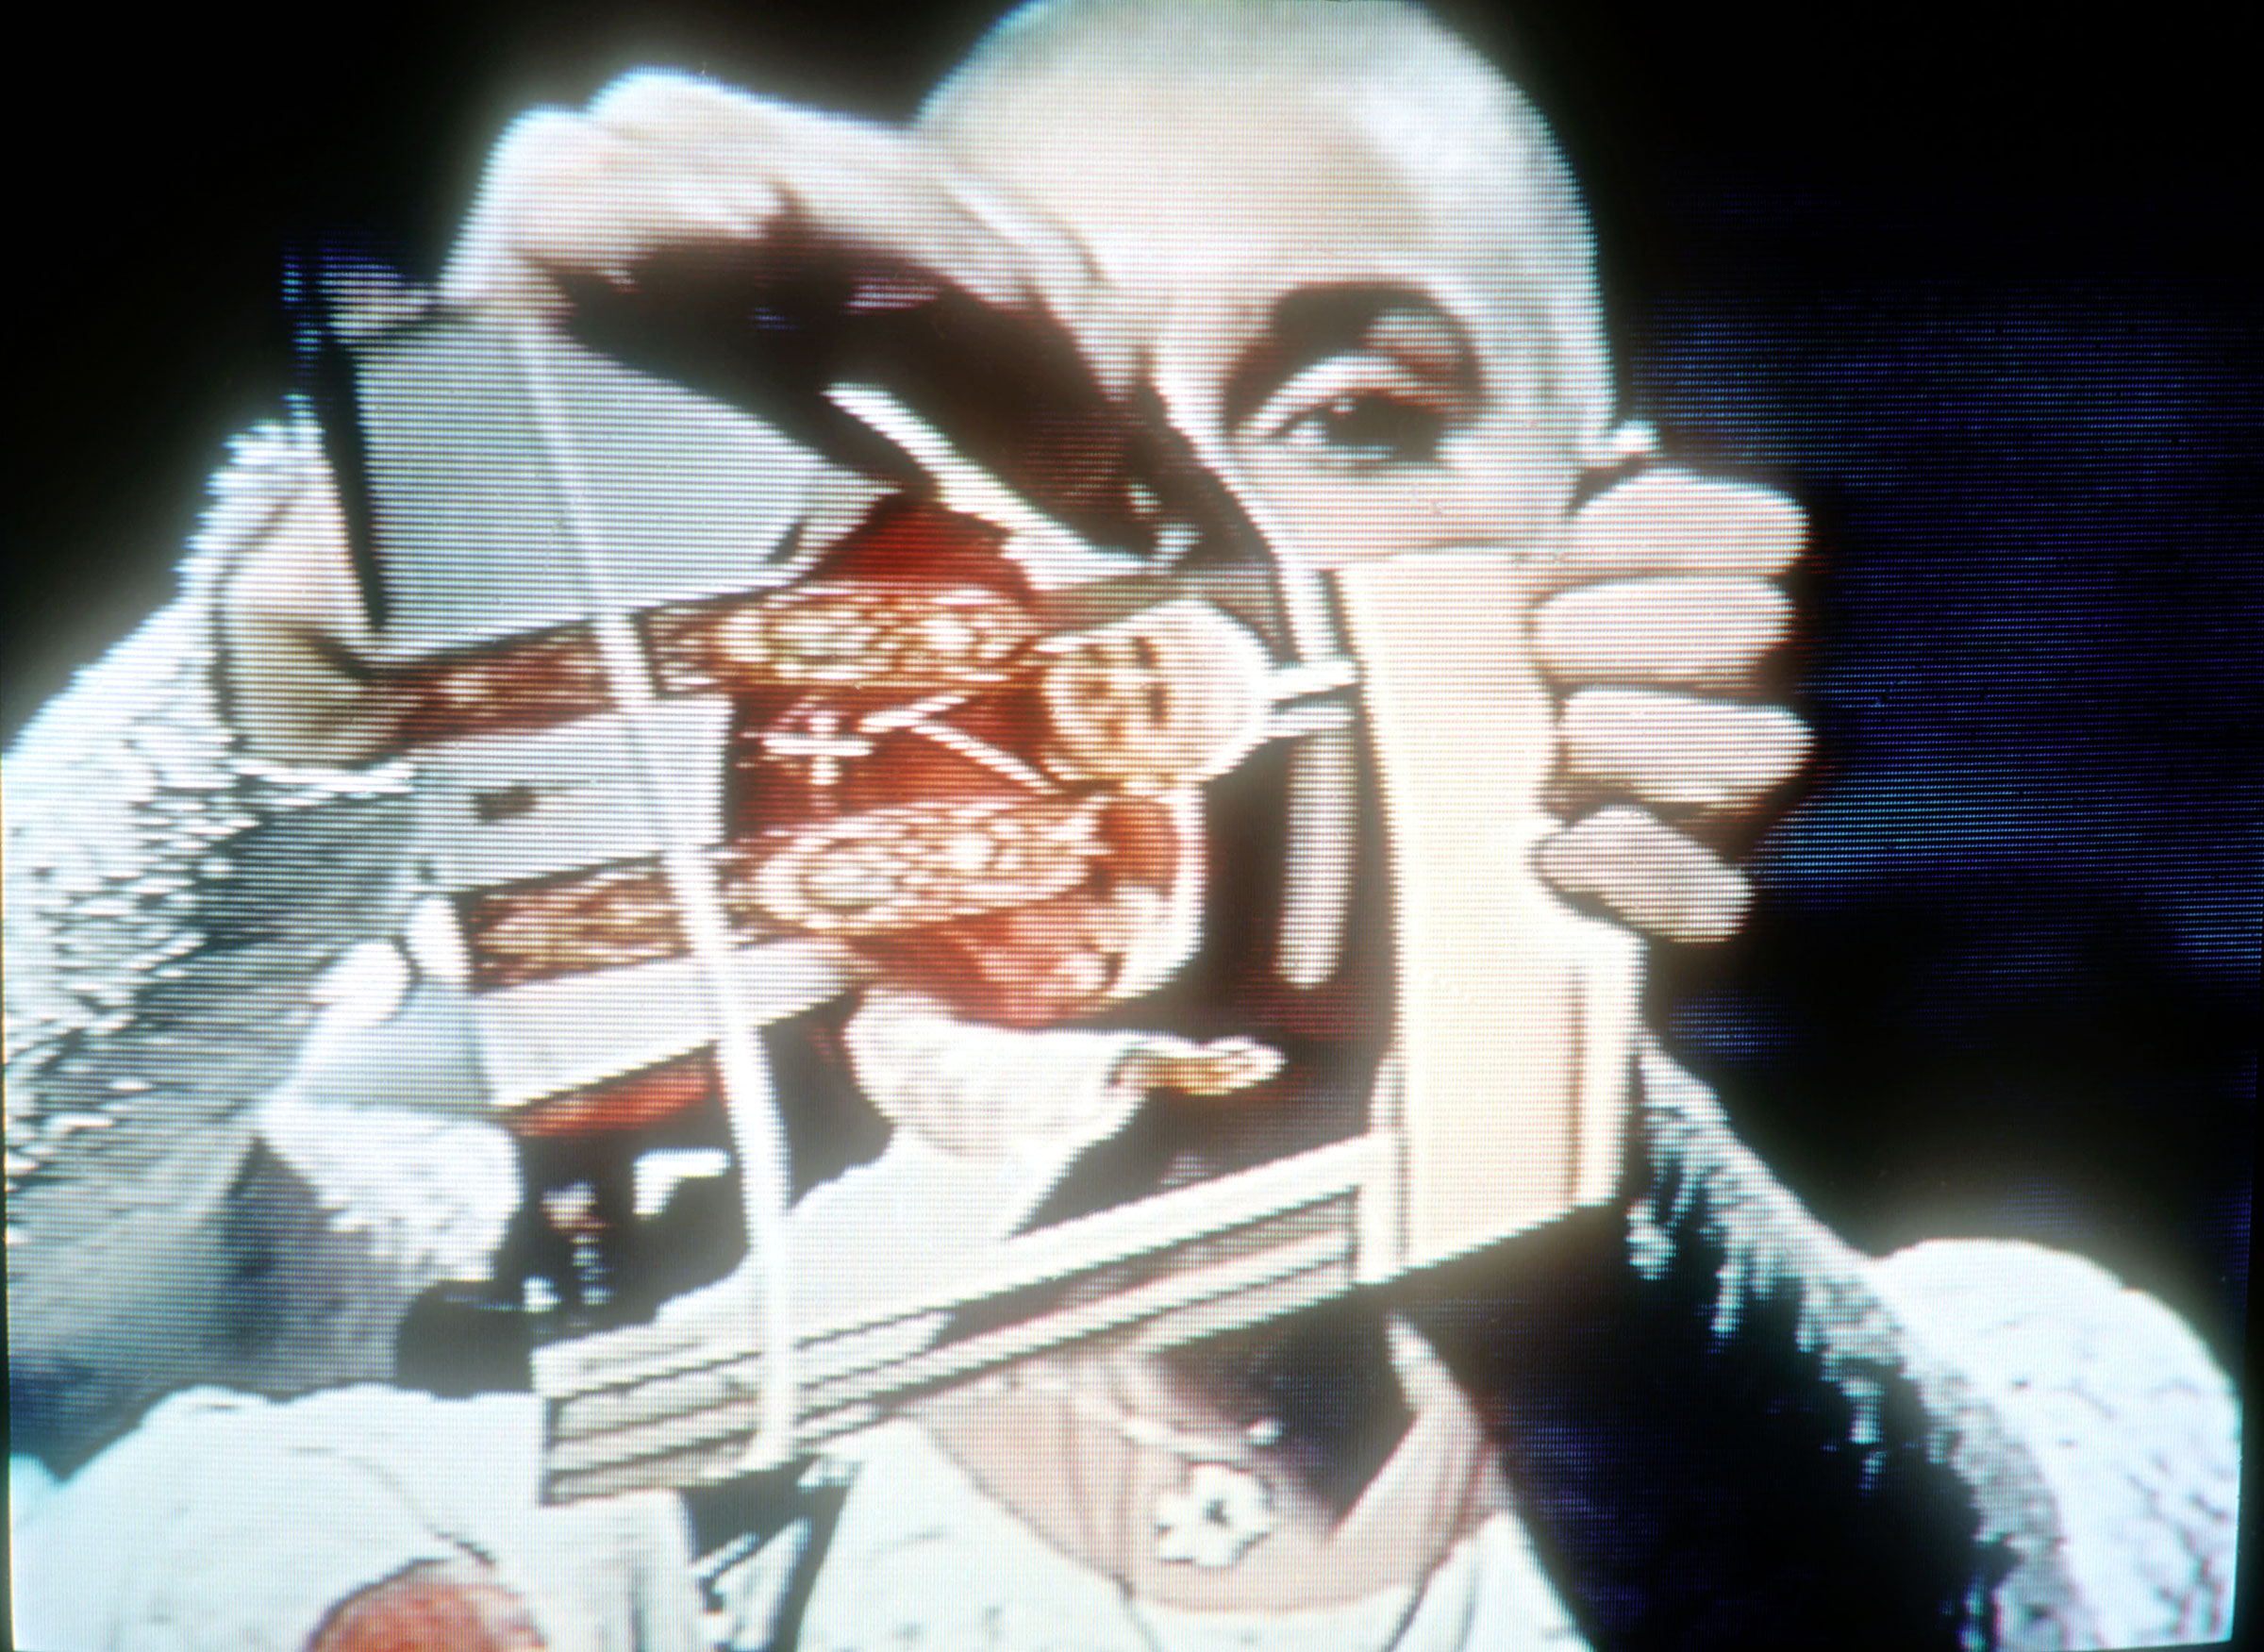 Singer Sinead O'Connor rips up a picture of Pope John Paul II October 3, 1992 on the TV show "Saturday Night Live". (Yvonne Hemsey—Getty Images)